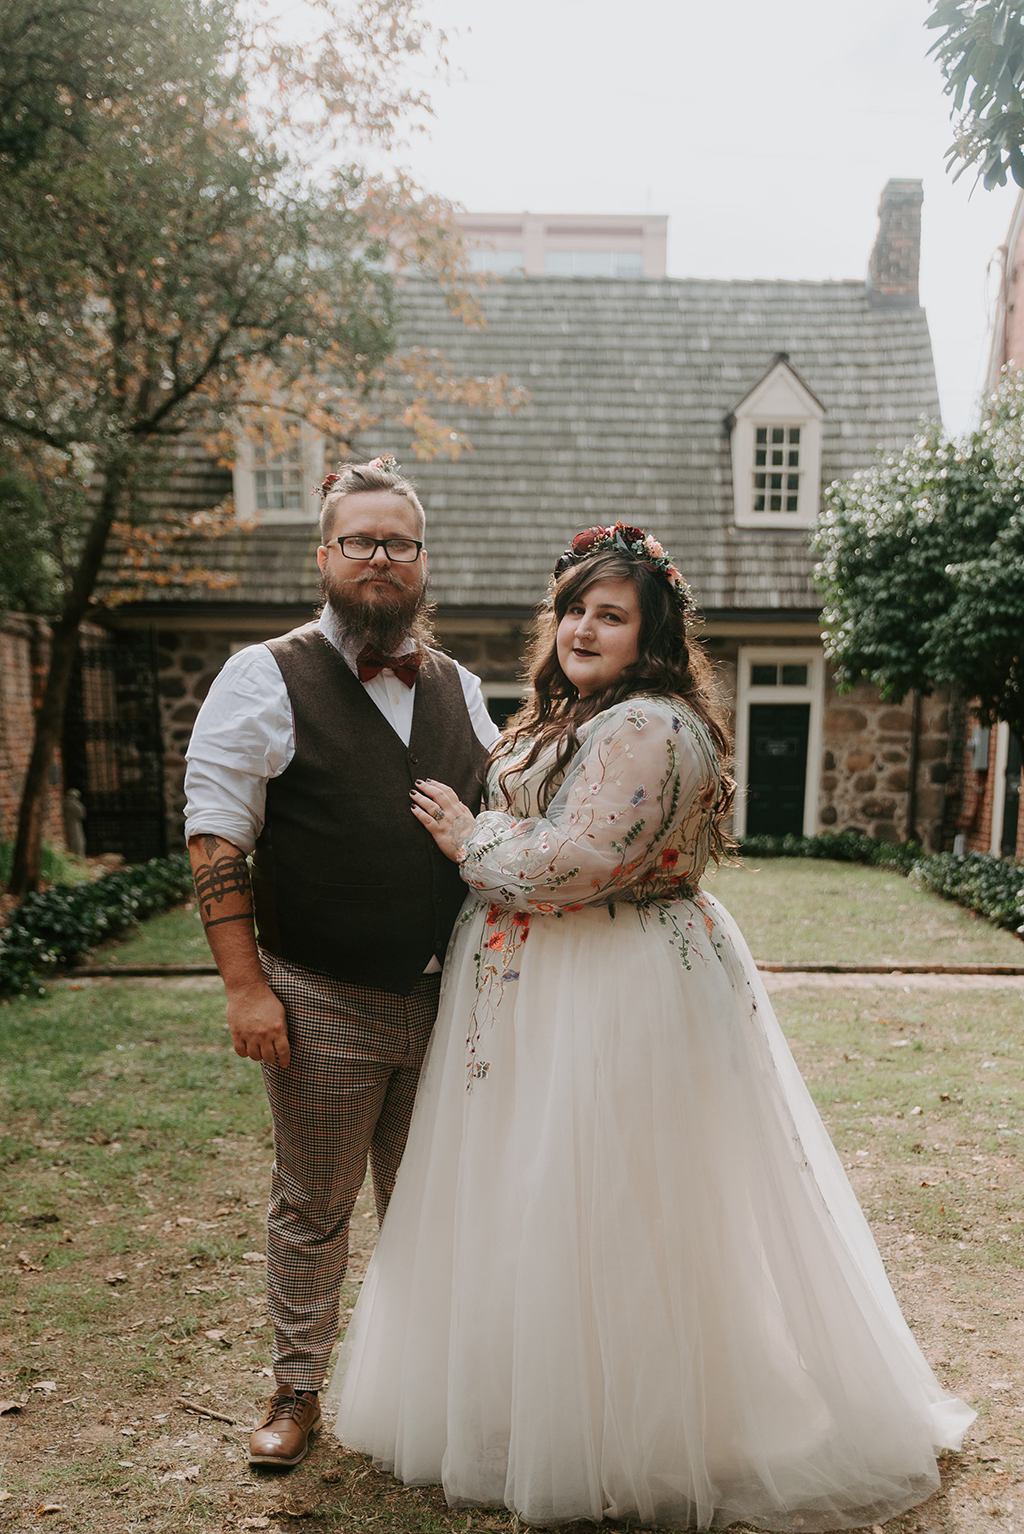 This couple went for a cool fall Edgar Allan Poe themed wedding as he's their favorite writer